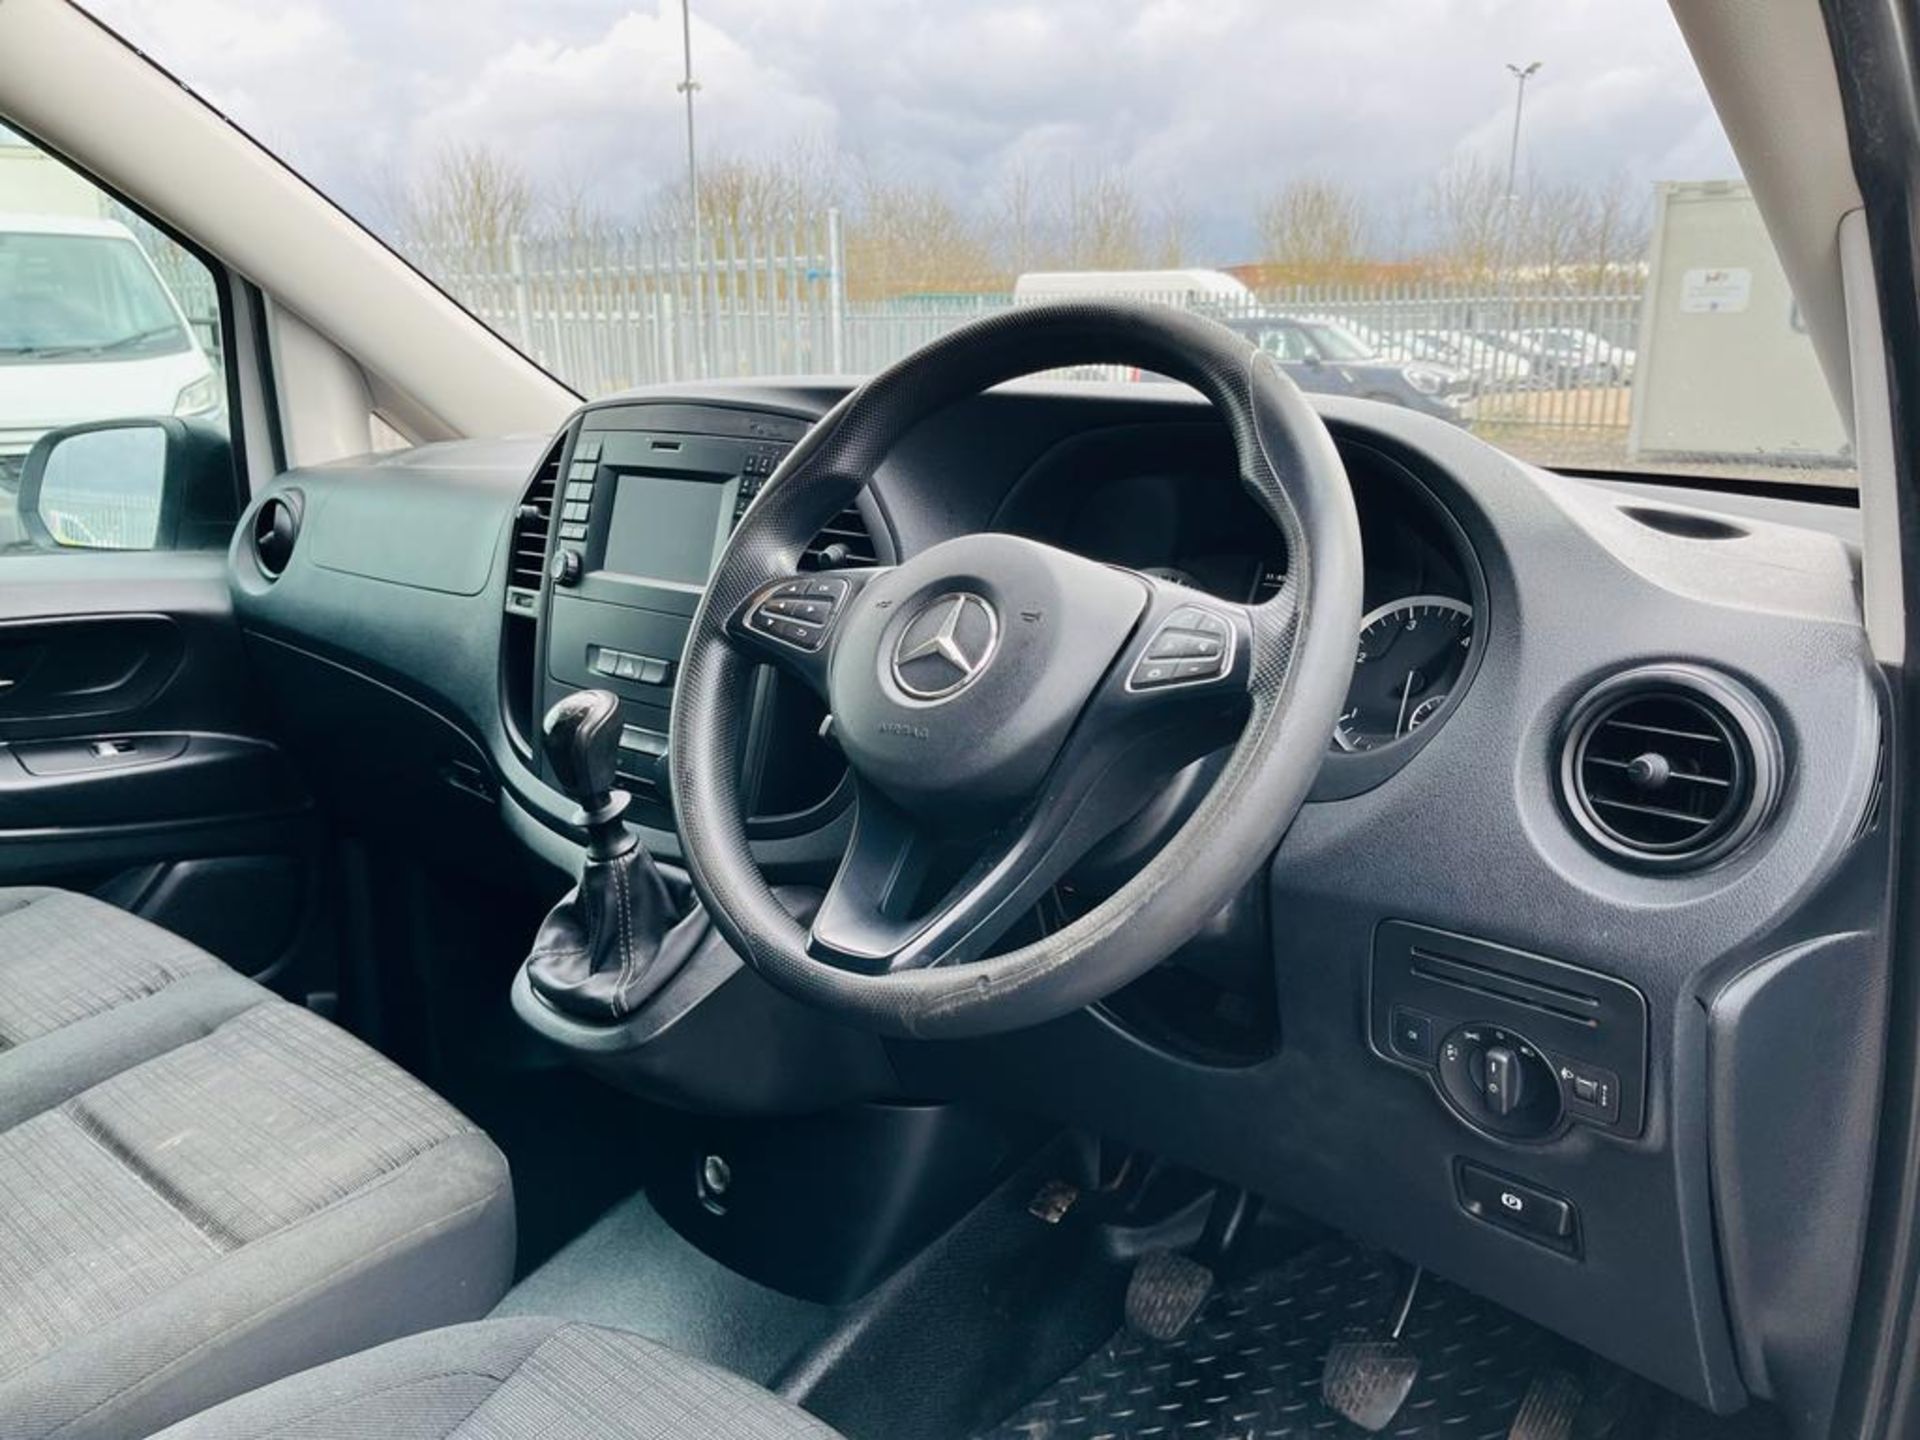 Mercedes Benz Vito 1.6 111 CDI FWD 2019 '19 Reg' - ULEZ Compliant - Only 85,733 Miles - Image 16 of 24